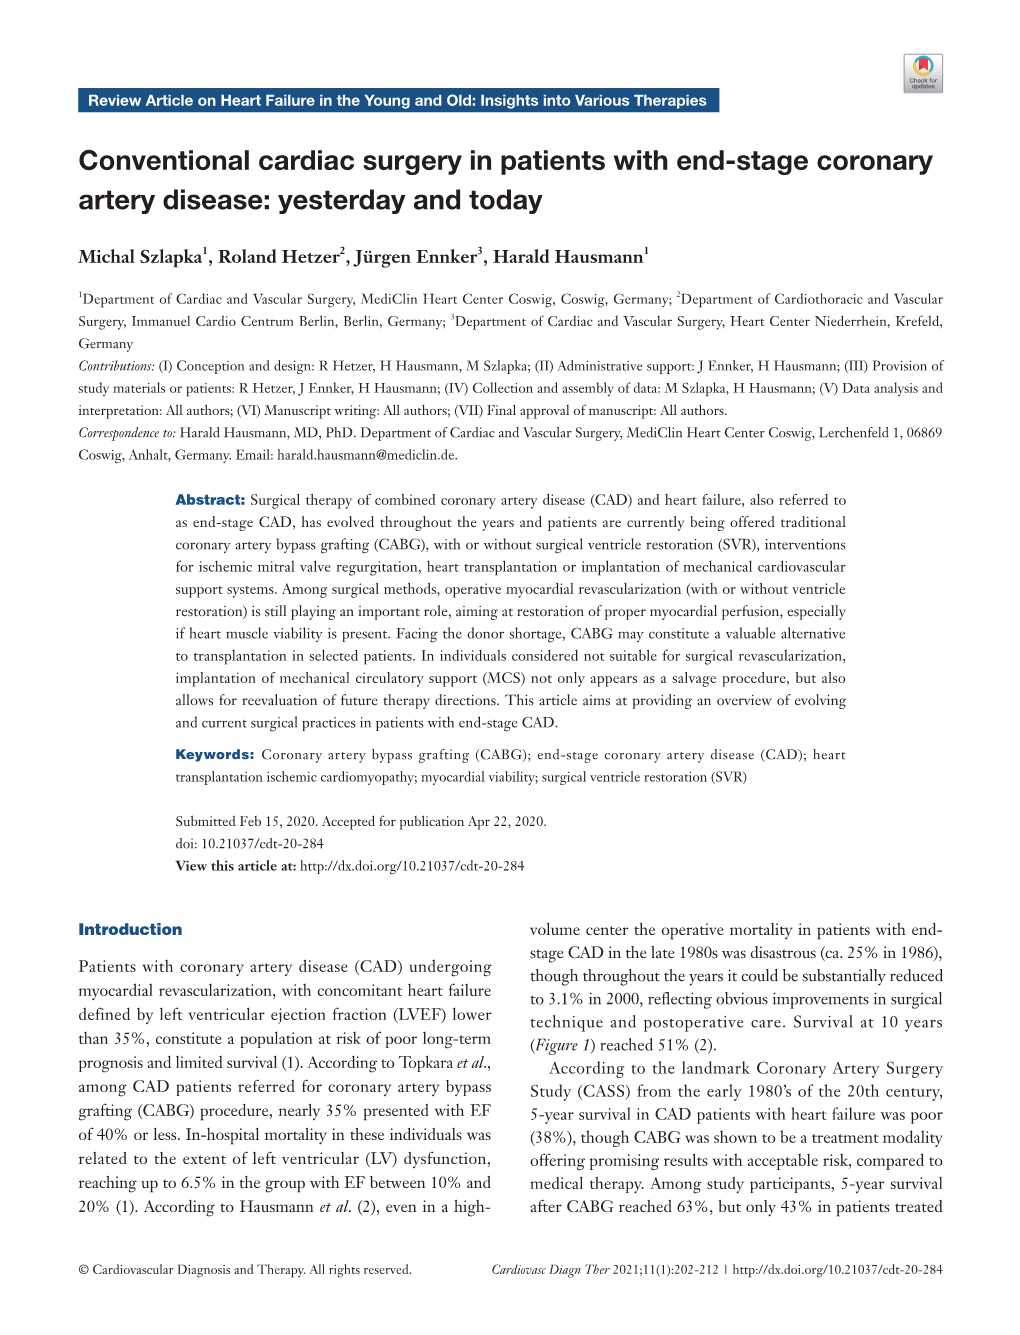 Conventional Cardiac Surgery in Patients with End-Stage Coronary Artery Disease: Yesterday and Today